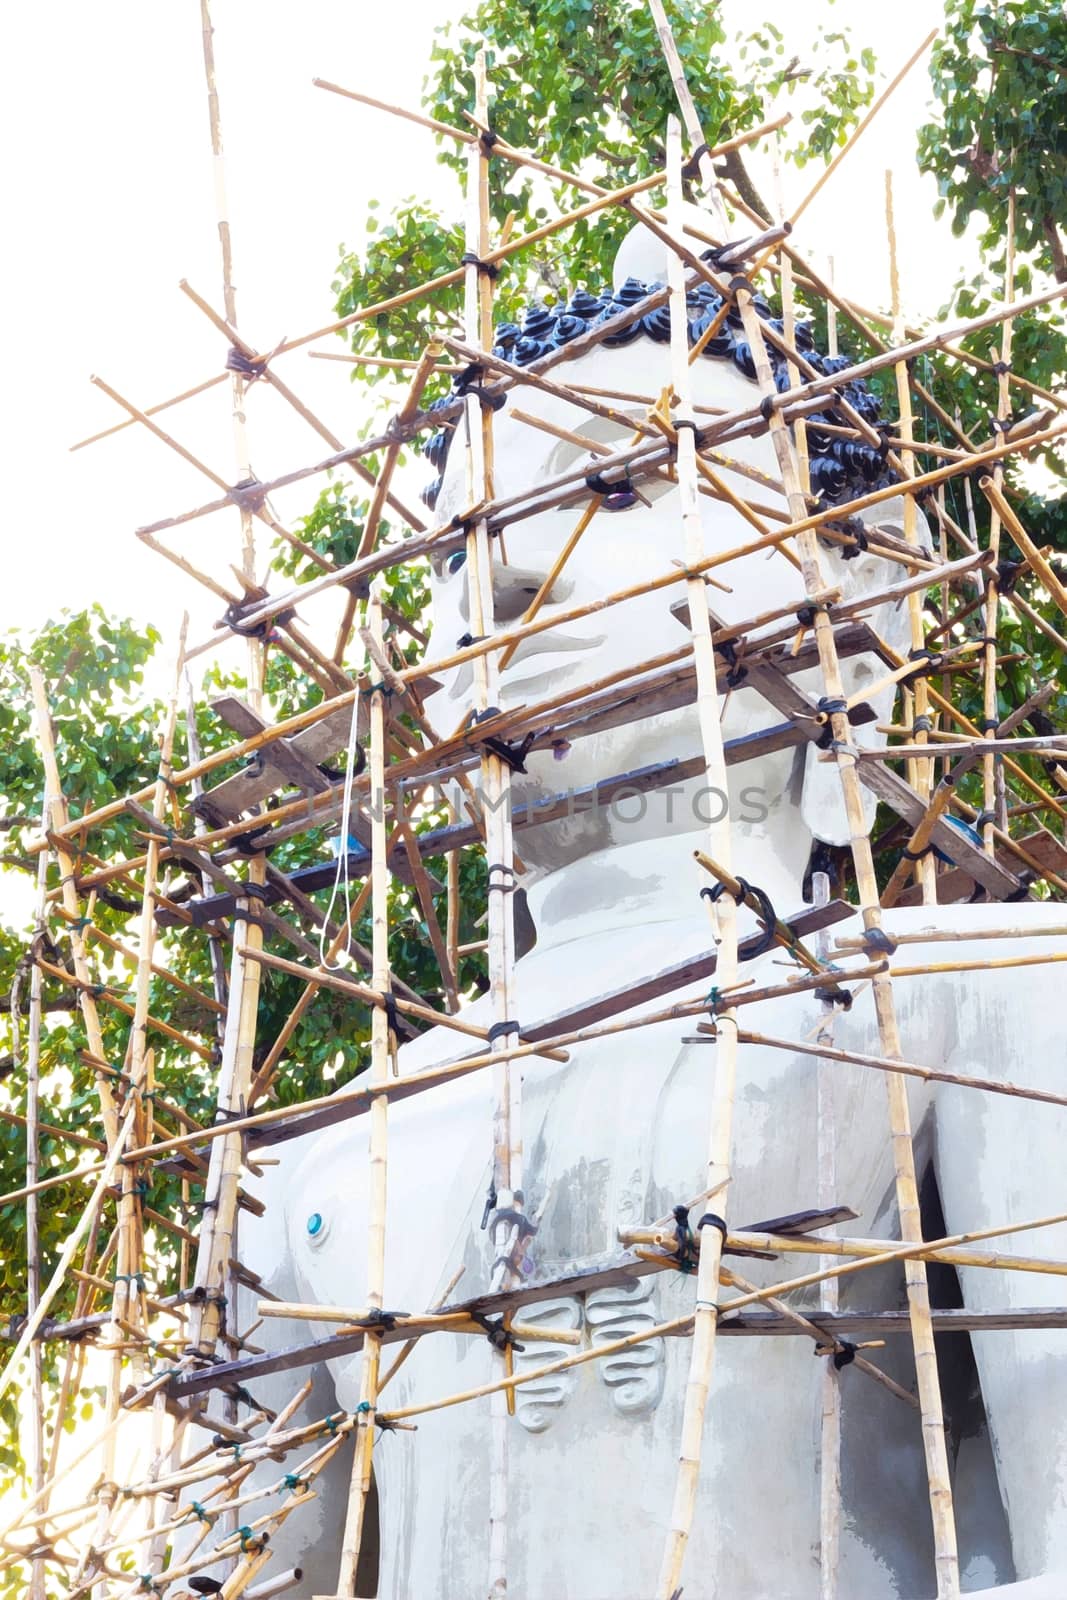 repairing Buddha image in thailand by a3701027